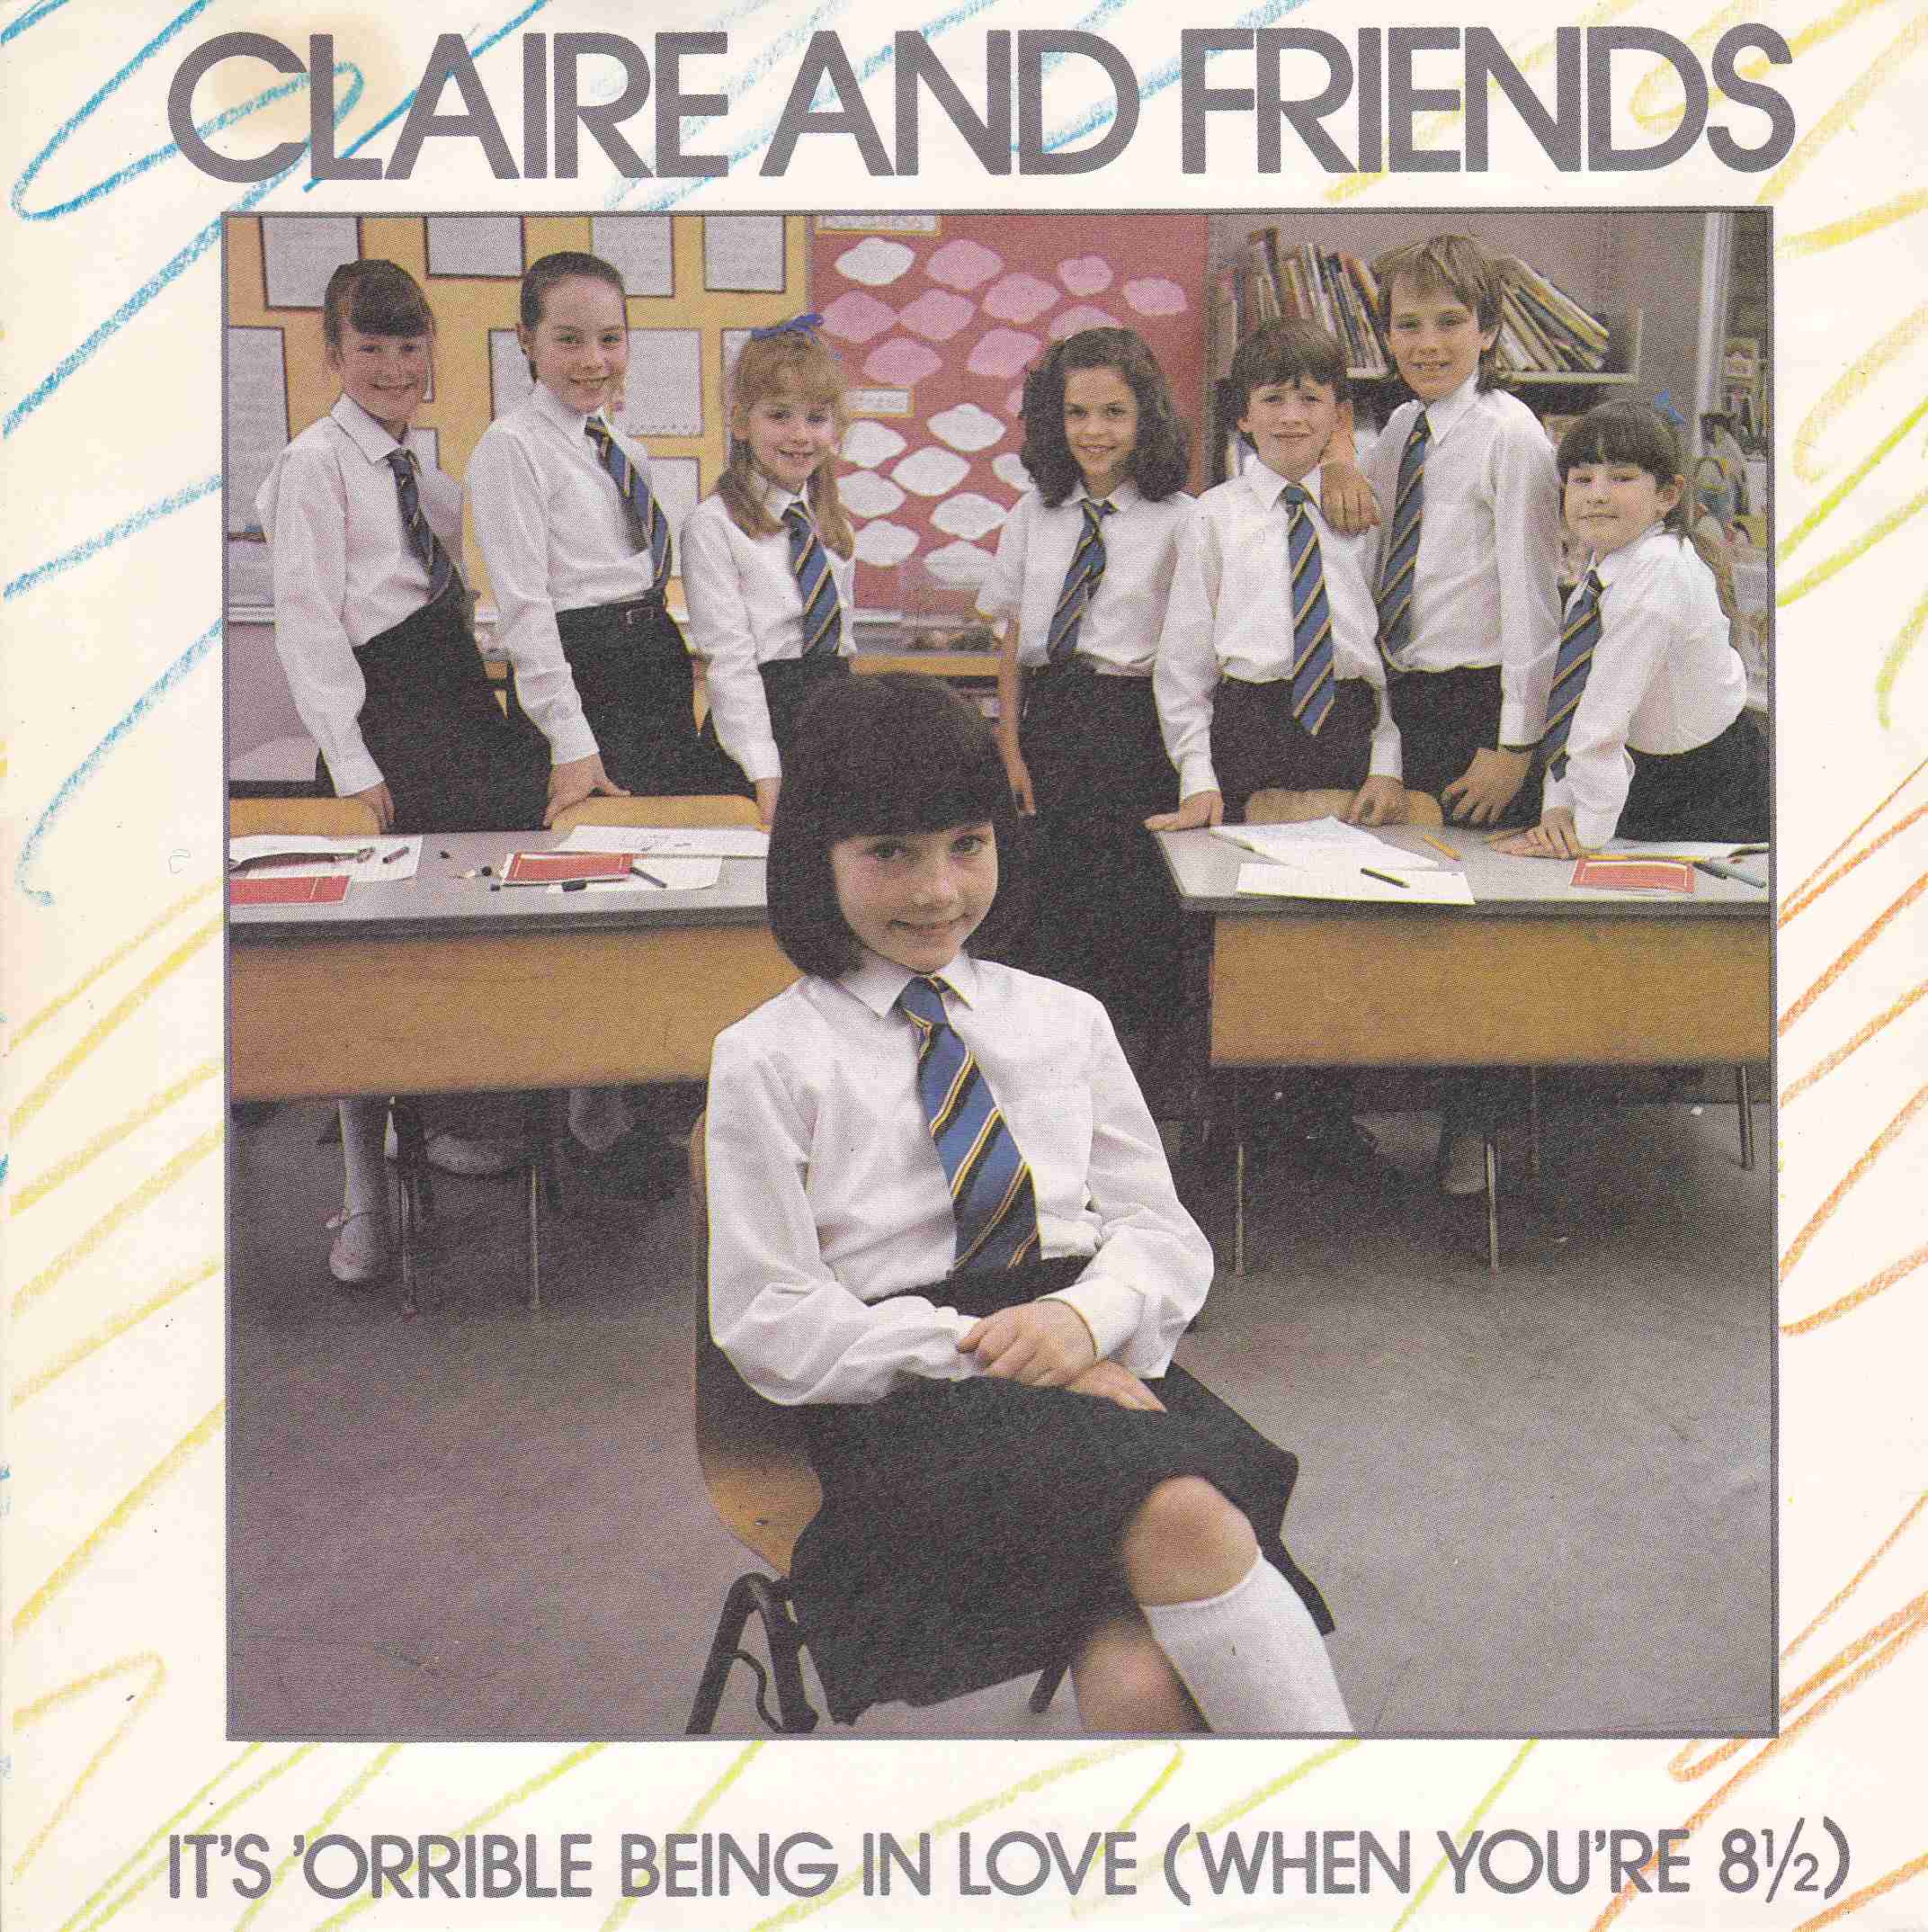 Picture of RESL 189 It's 'orrible being in love (when you're 8 1/2) by artist Mick Coleman / Kevin Parrott / Claire and Friends \(Claire Usher\) from the BBC records and Tapes library